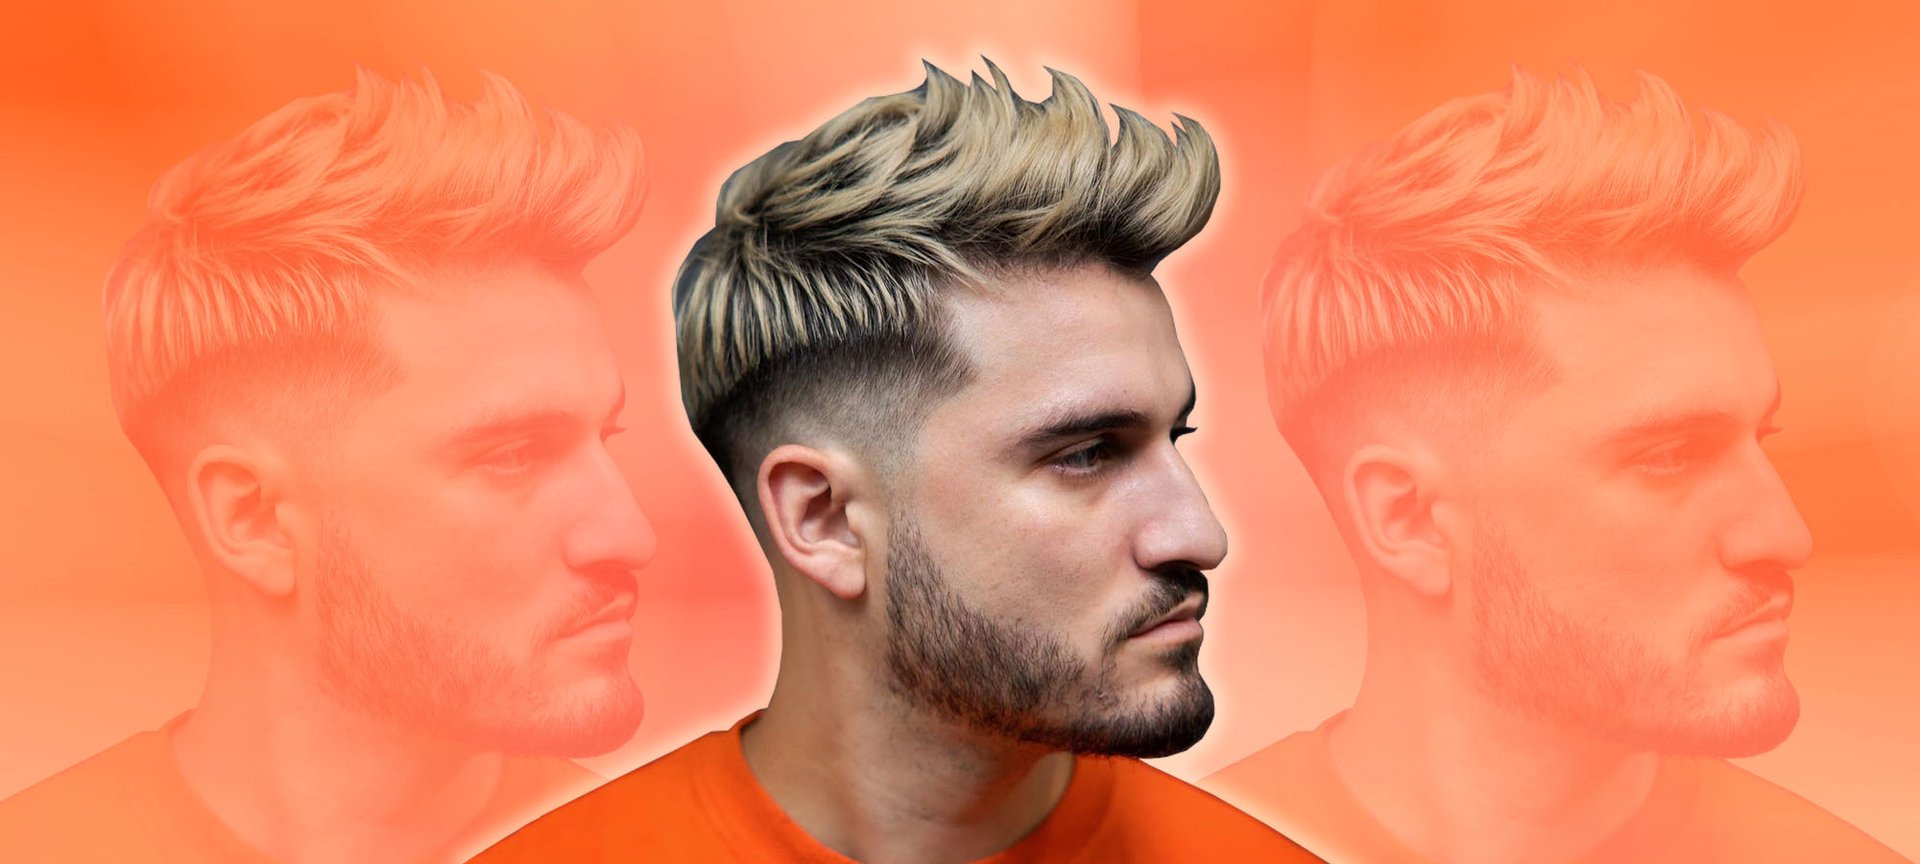 TOP 50 Indian Slope Haircut  Hairstyles for Men  Buzz Cut